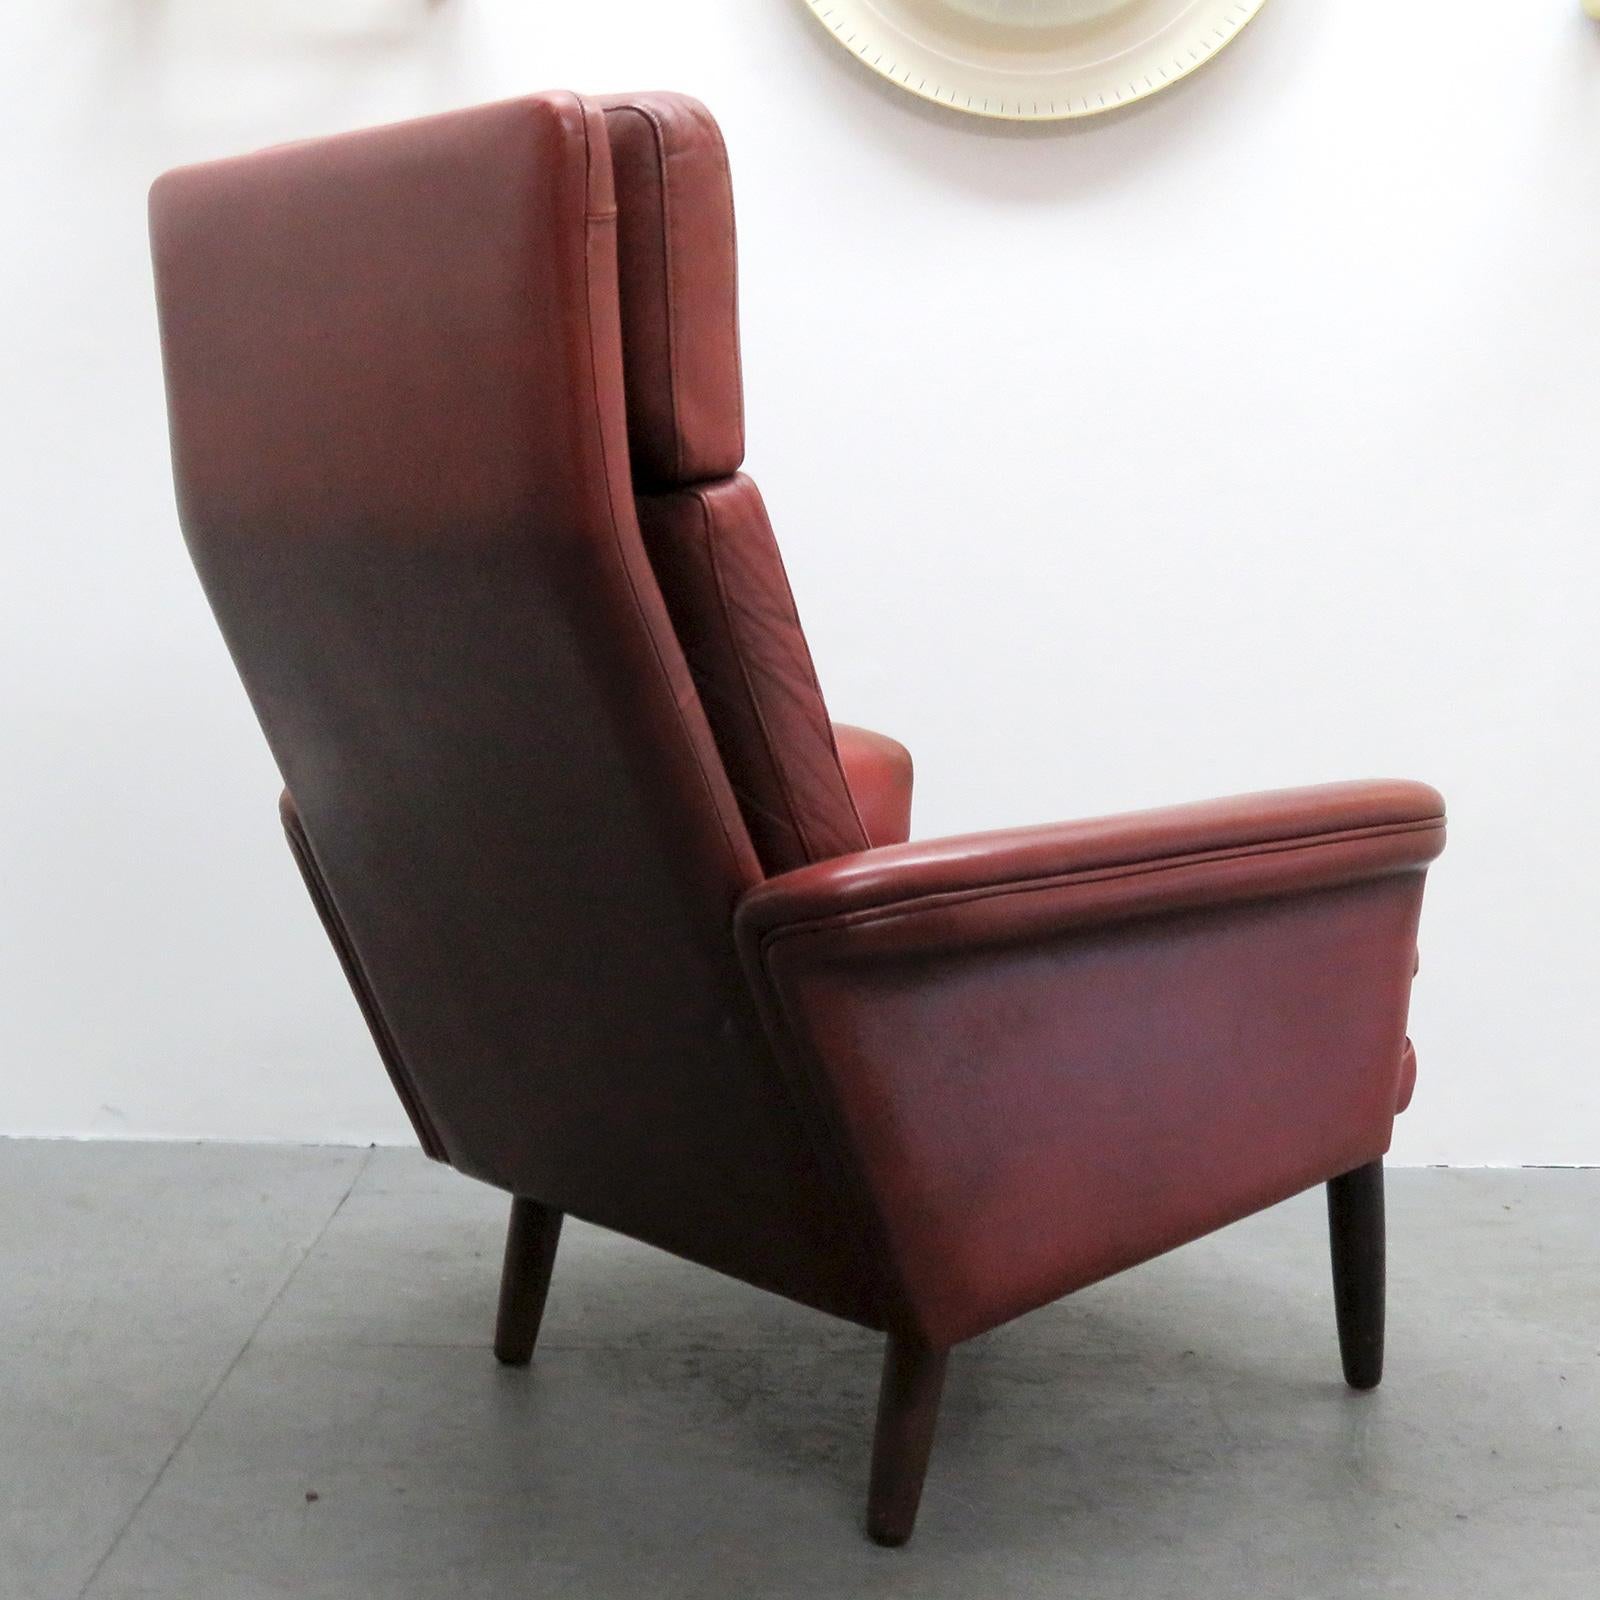 Mid-20th Century Danish High Back Leather Lounge Chair, 1960 For Sale